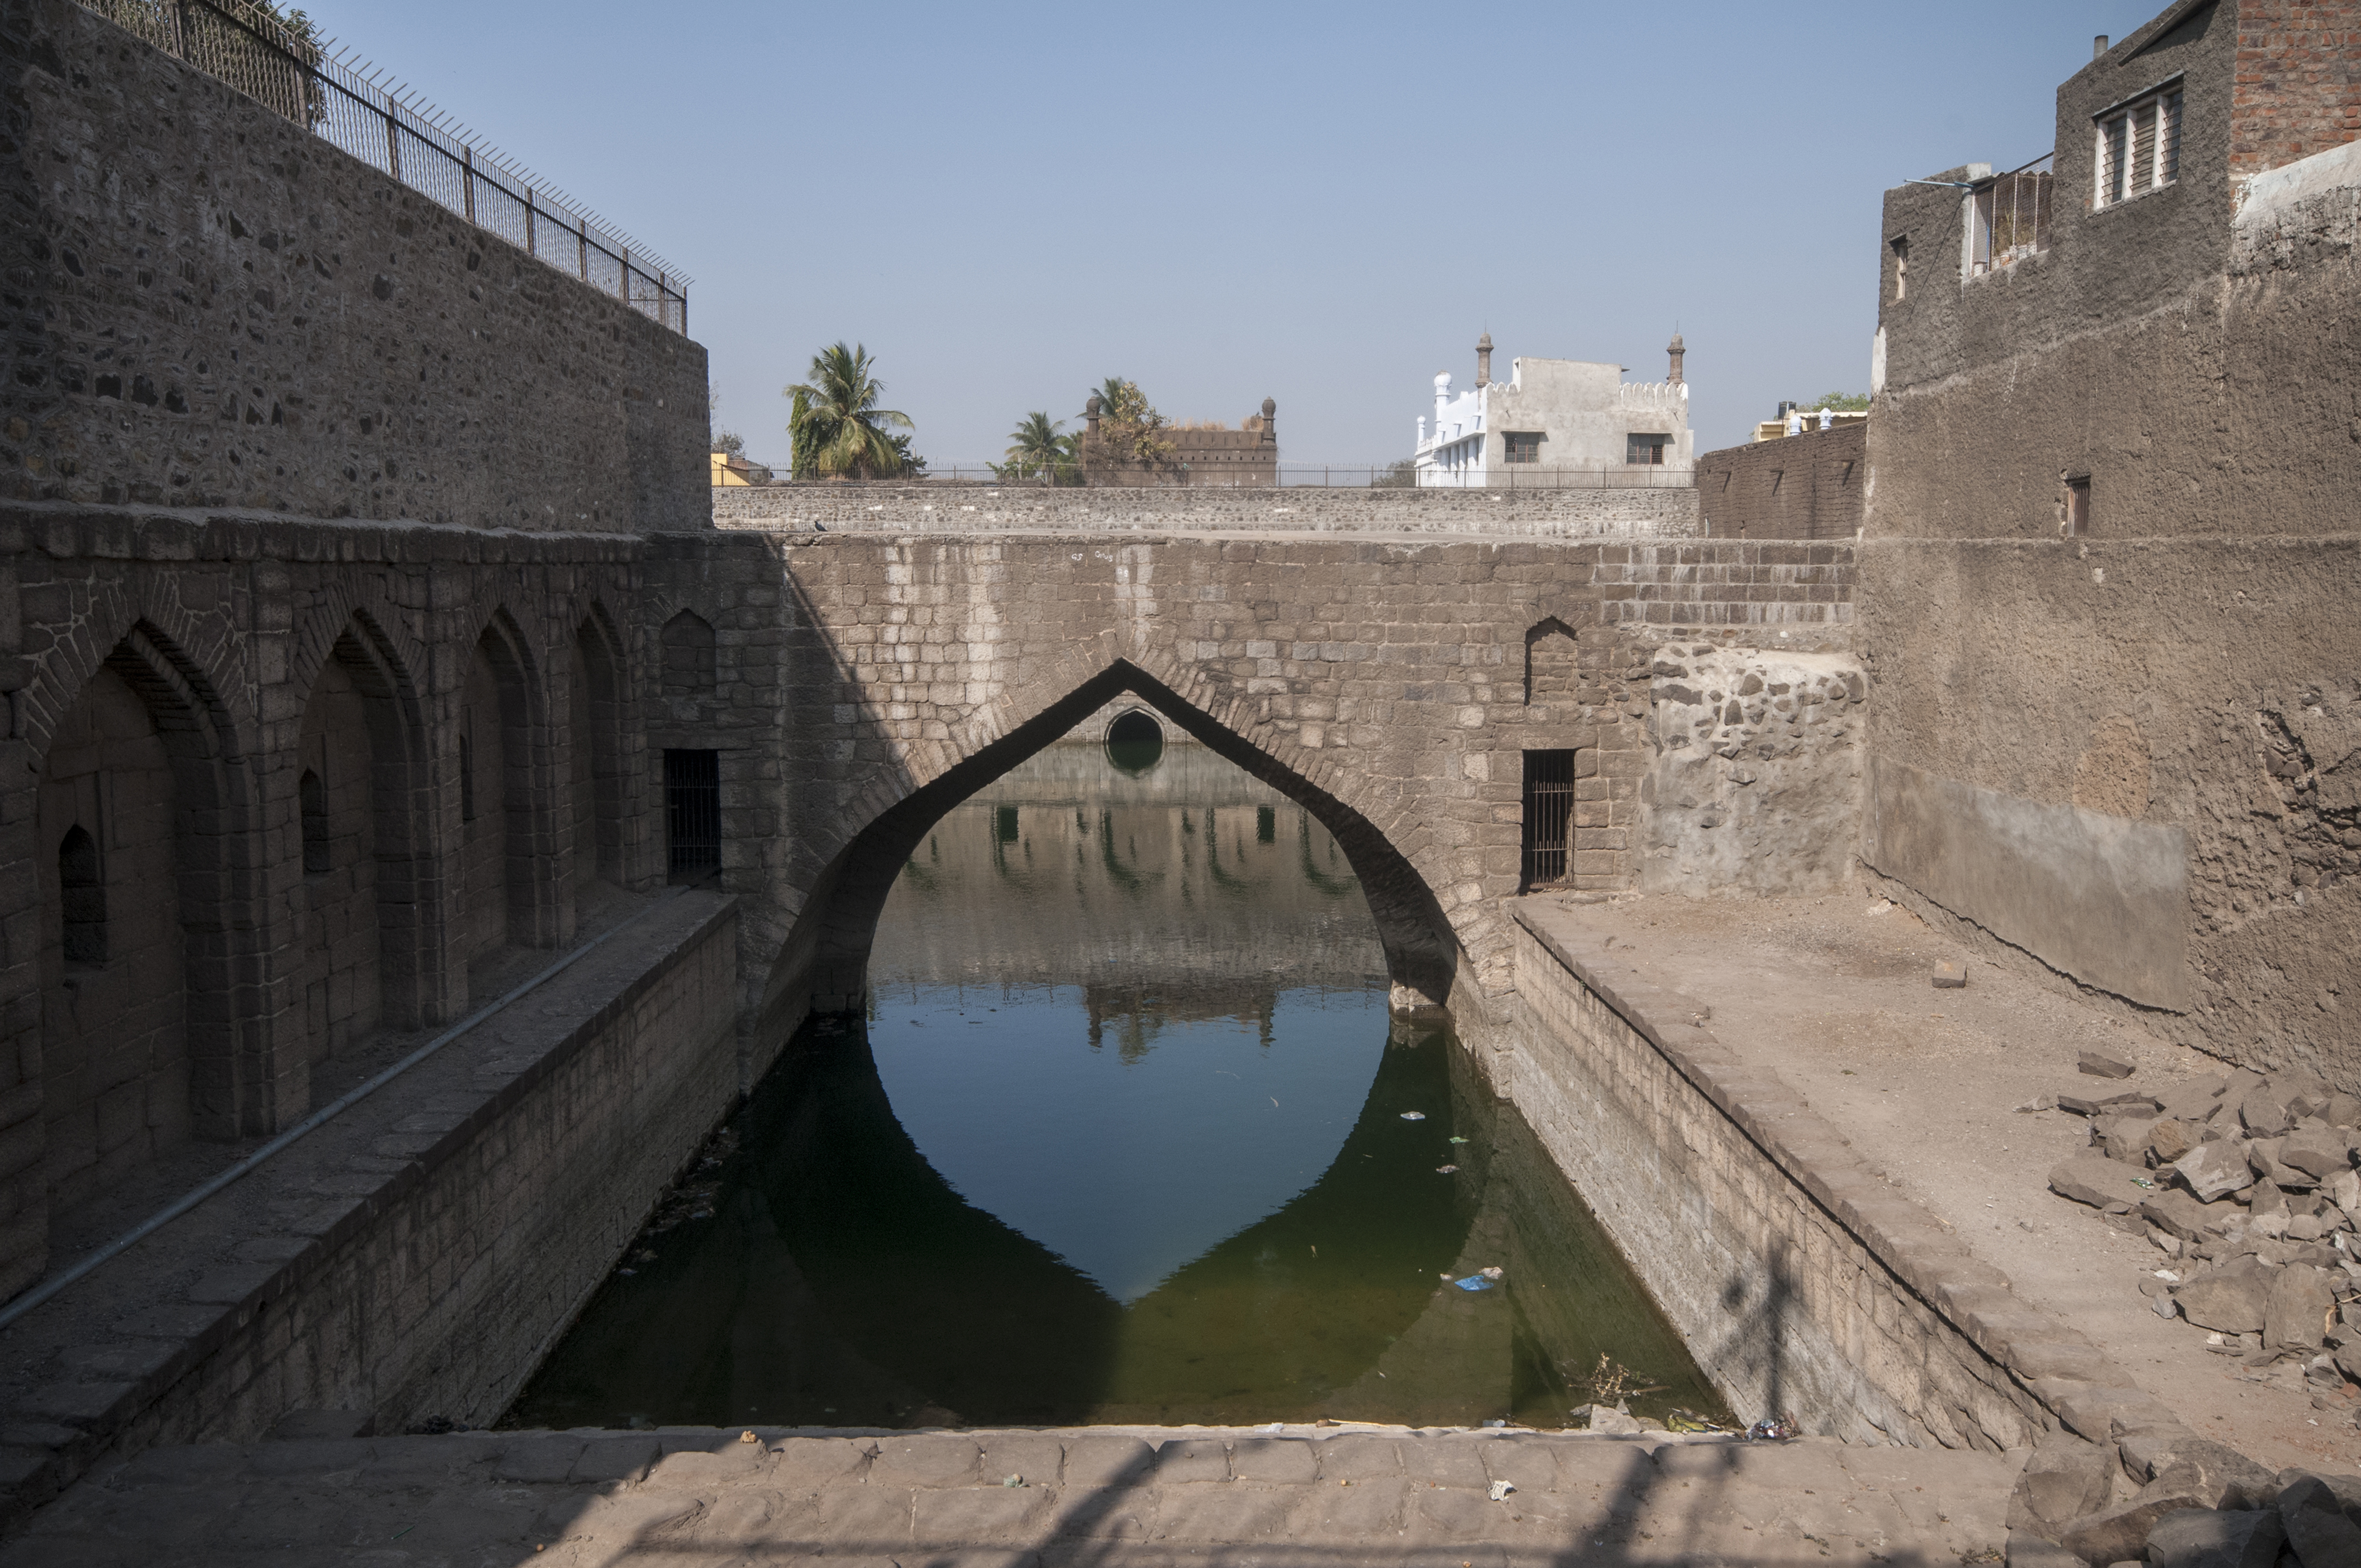 Caption: Water system at the Chand Baudi, near the walls of Bijapur. Photographer credit: Joginder Singh.